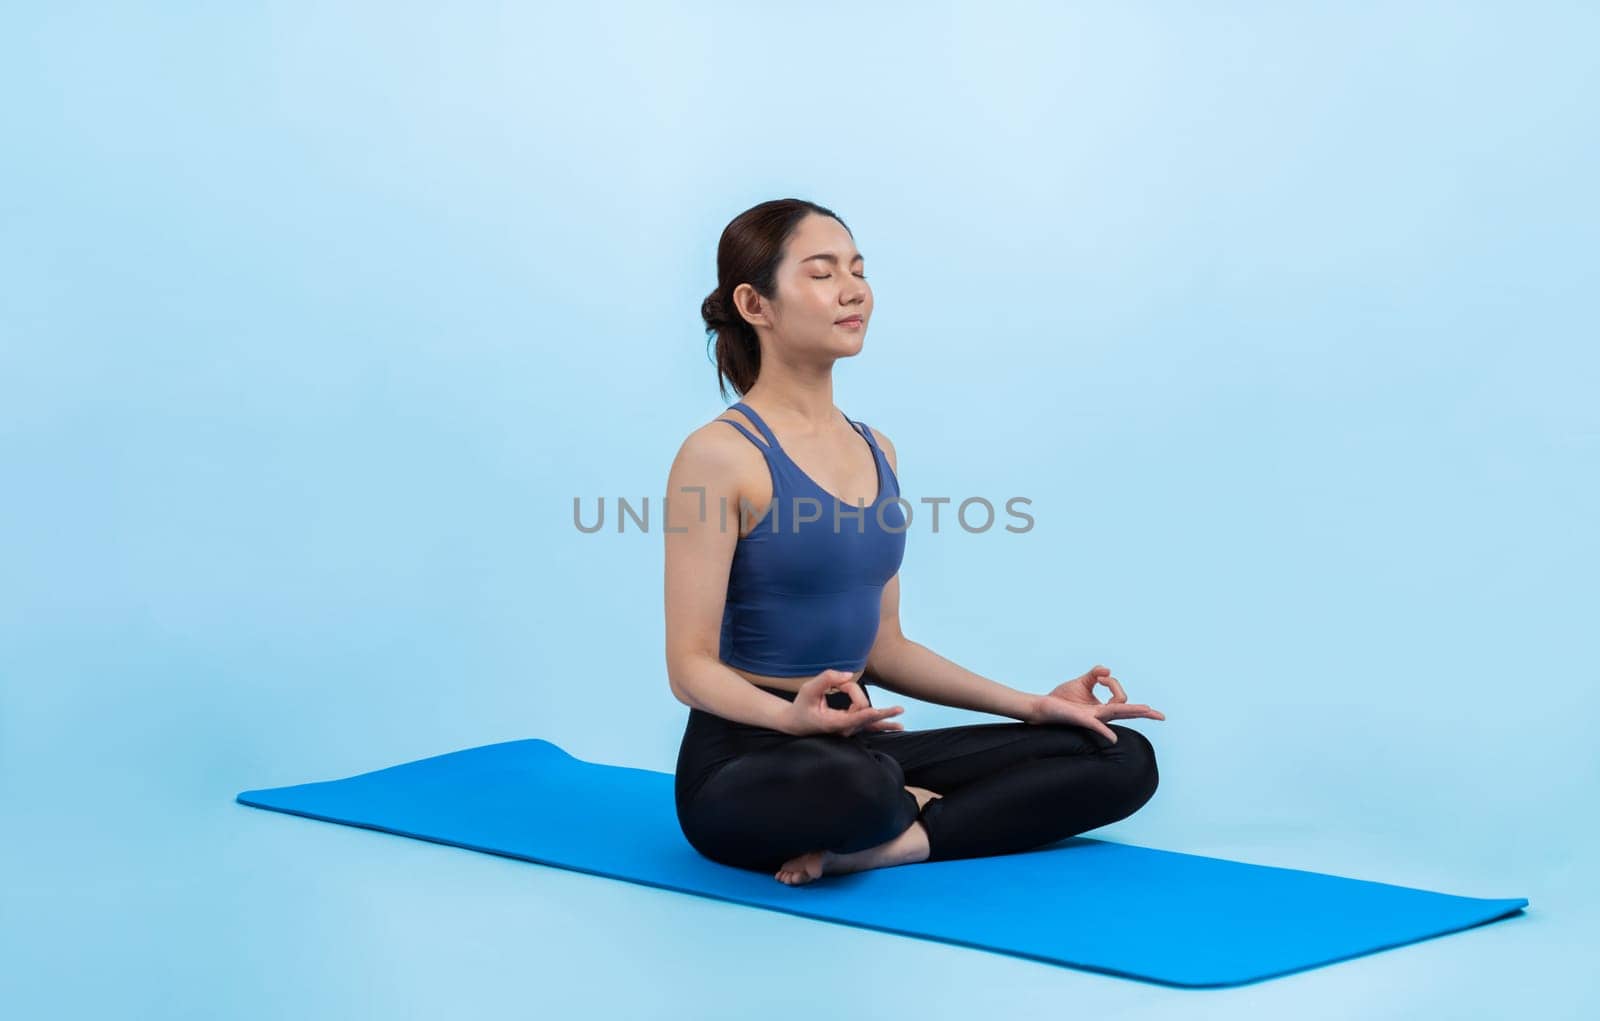 Asian woman in sportswear doing yoga exercise on fitness mat as her workout training routine. Healthy body care and calm meditation in yoga lifestyle in full body shot on isolated background. Vigorous